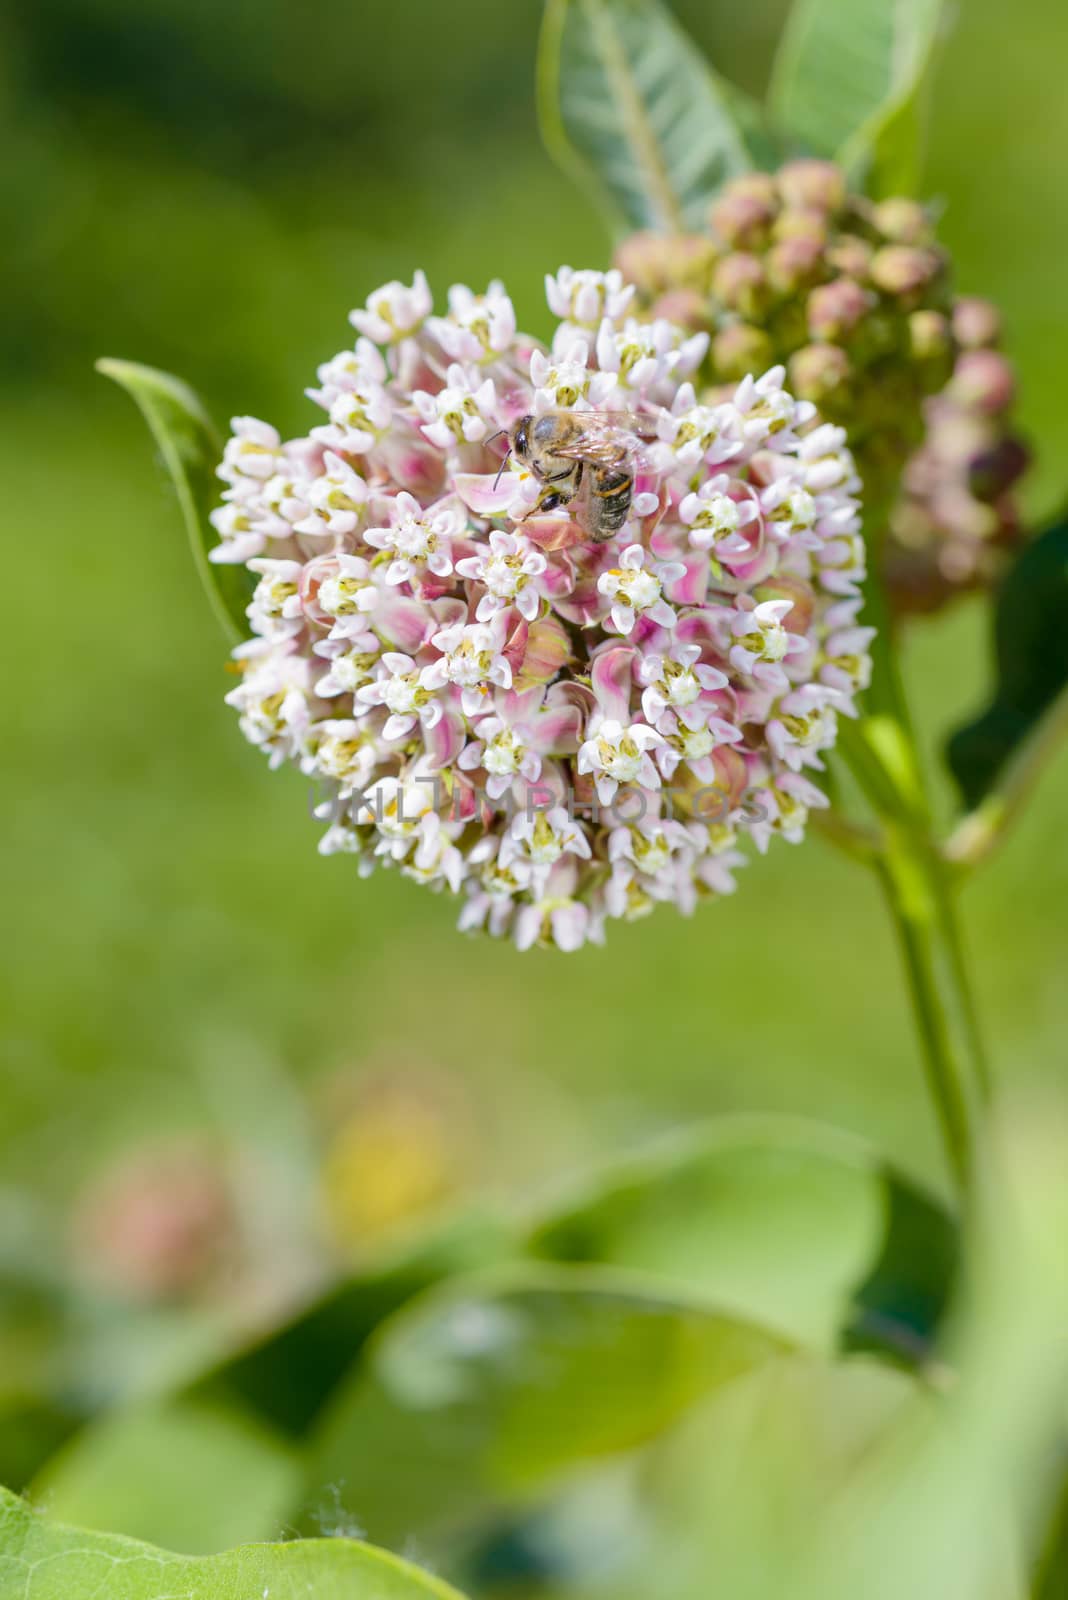 Asclepias Flower and Bee by MaxalTamor